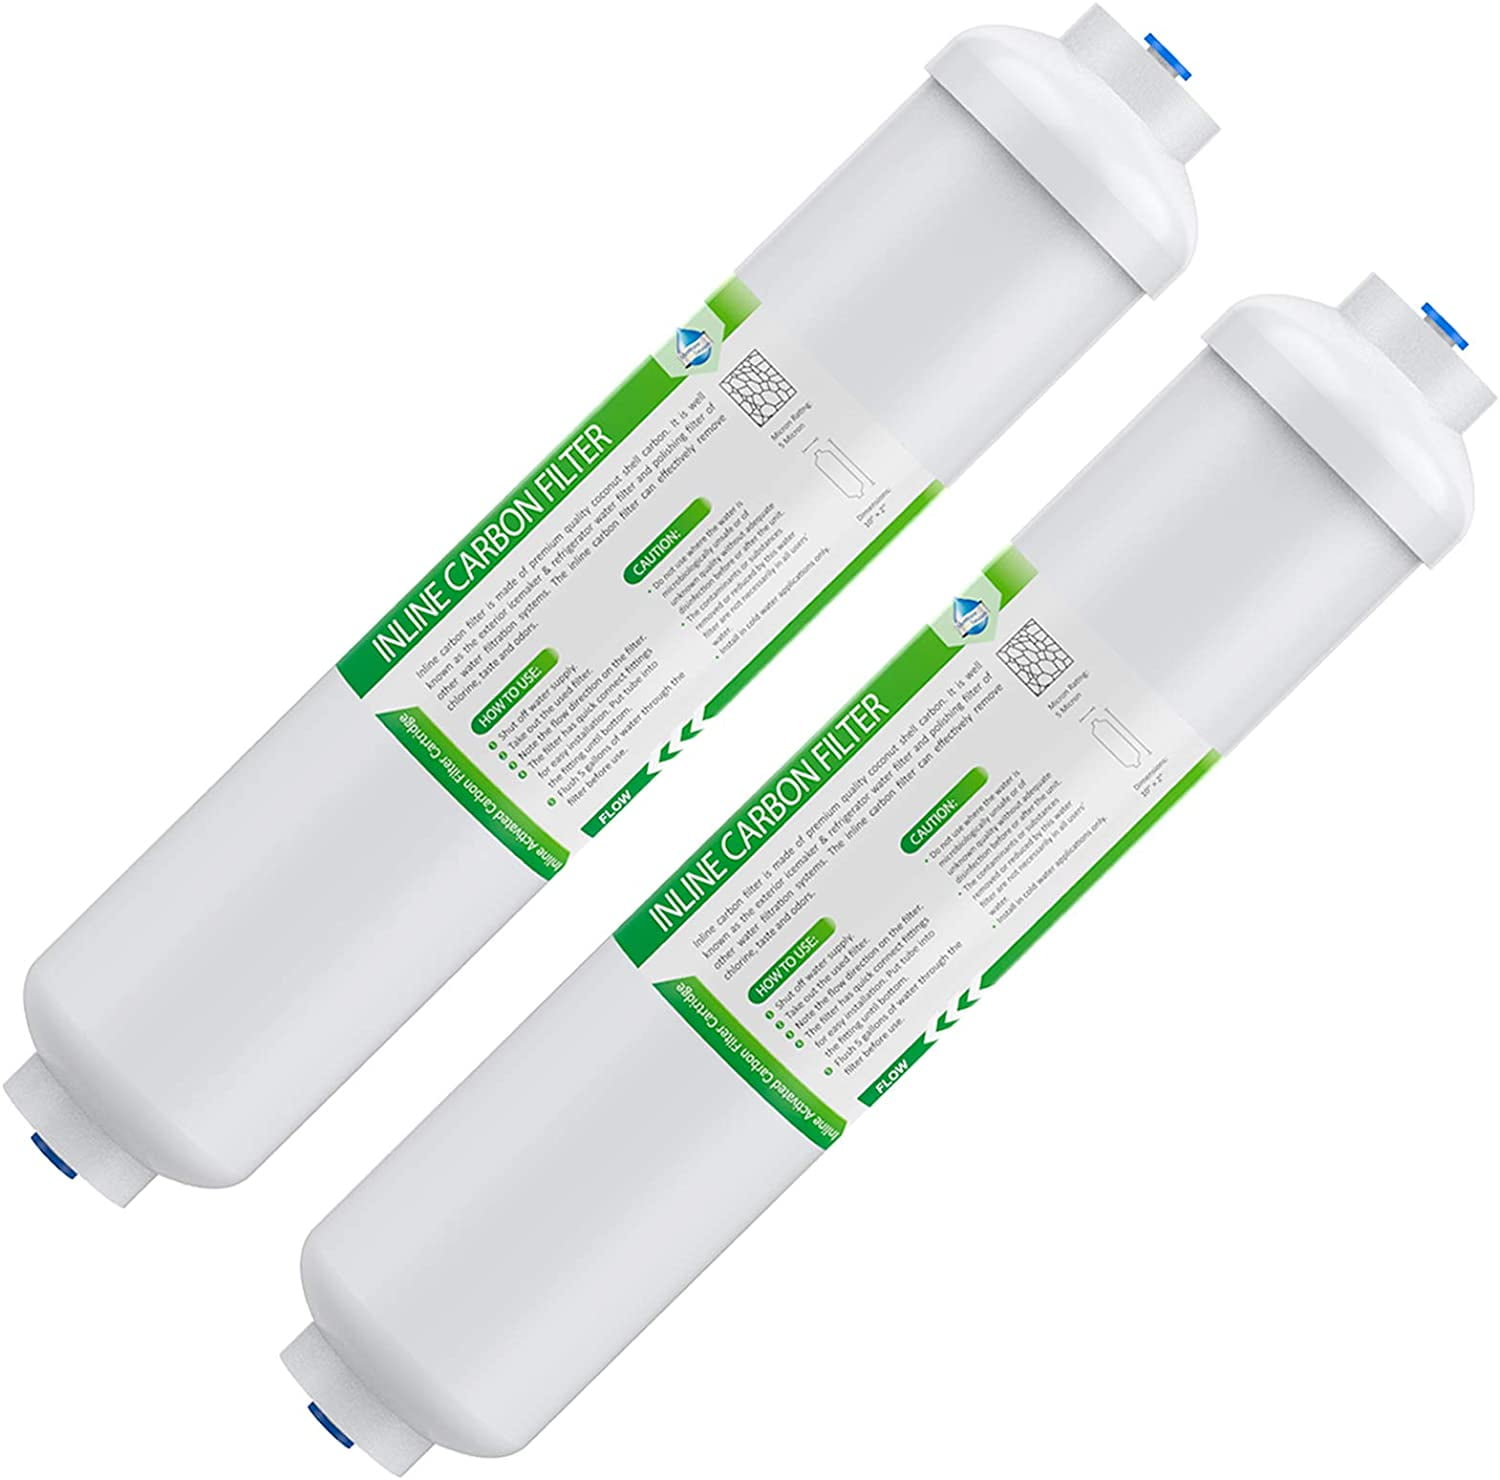 Ice Makers - Refrigerator Water Filter